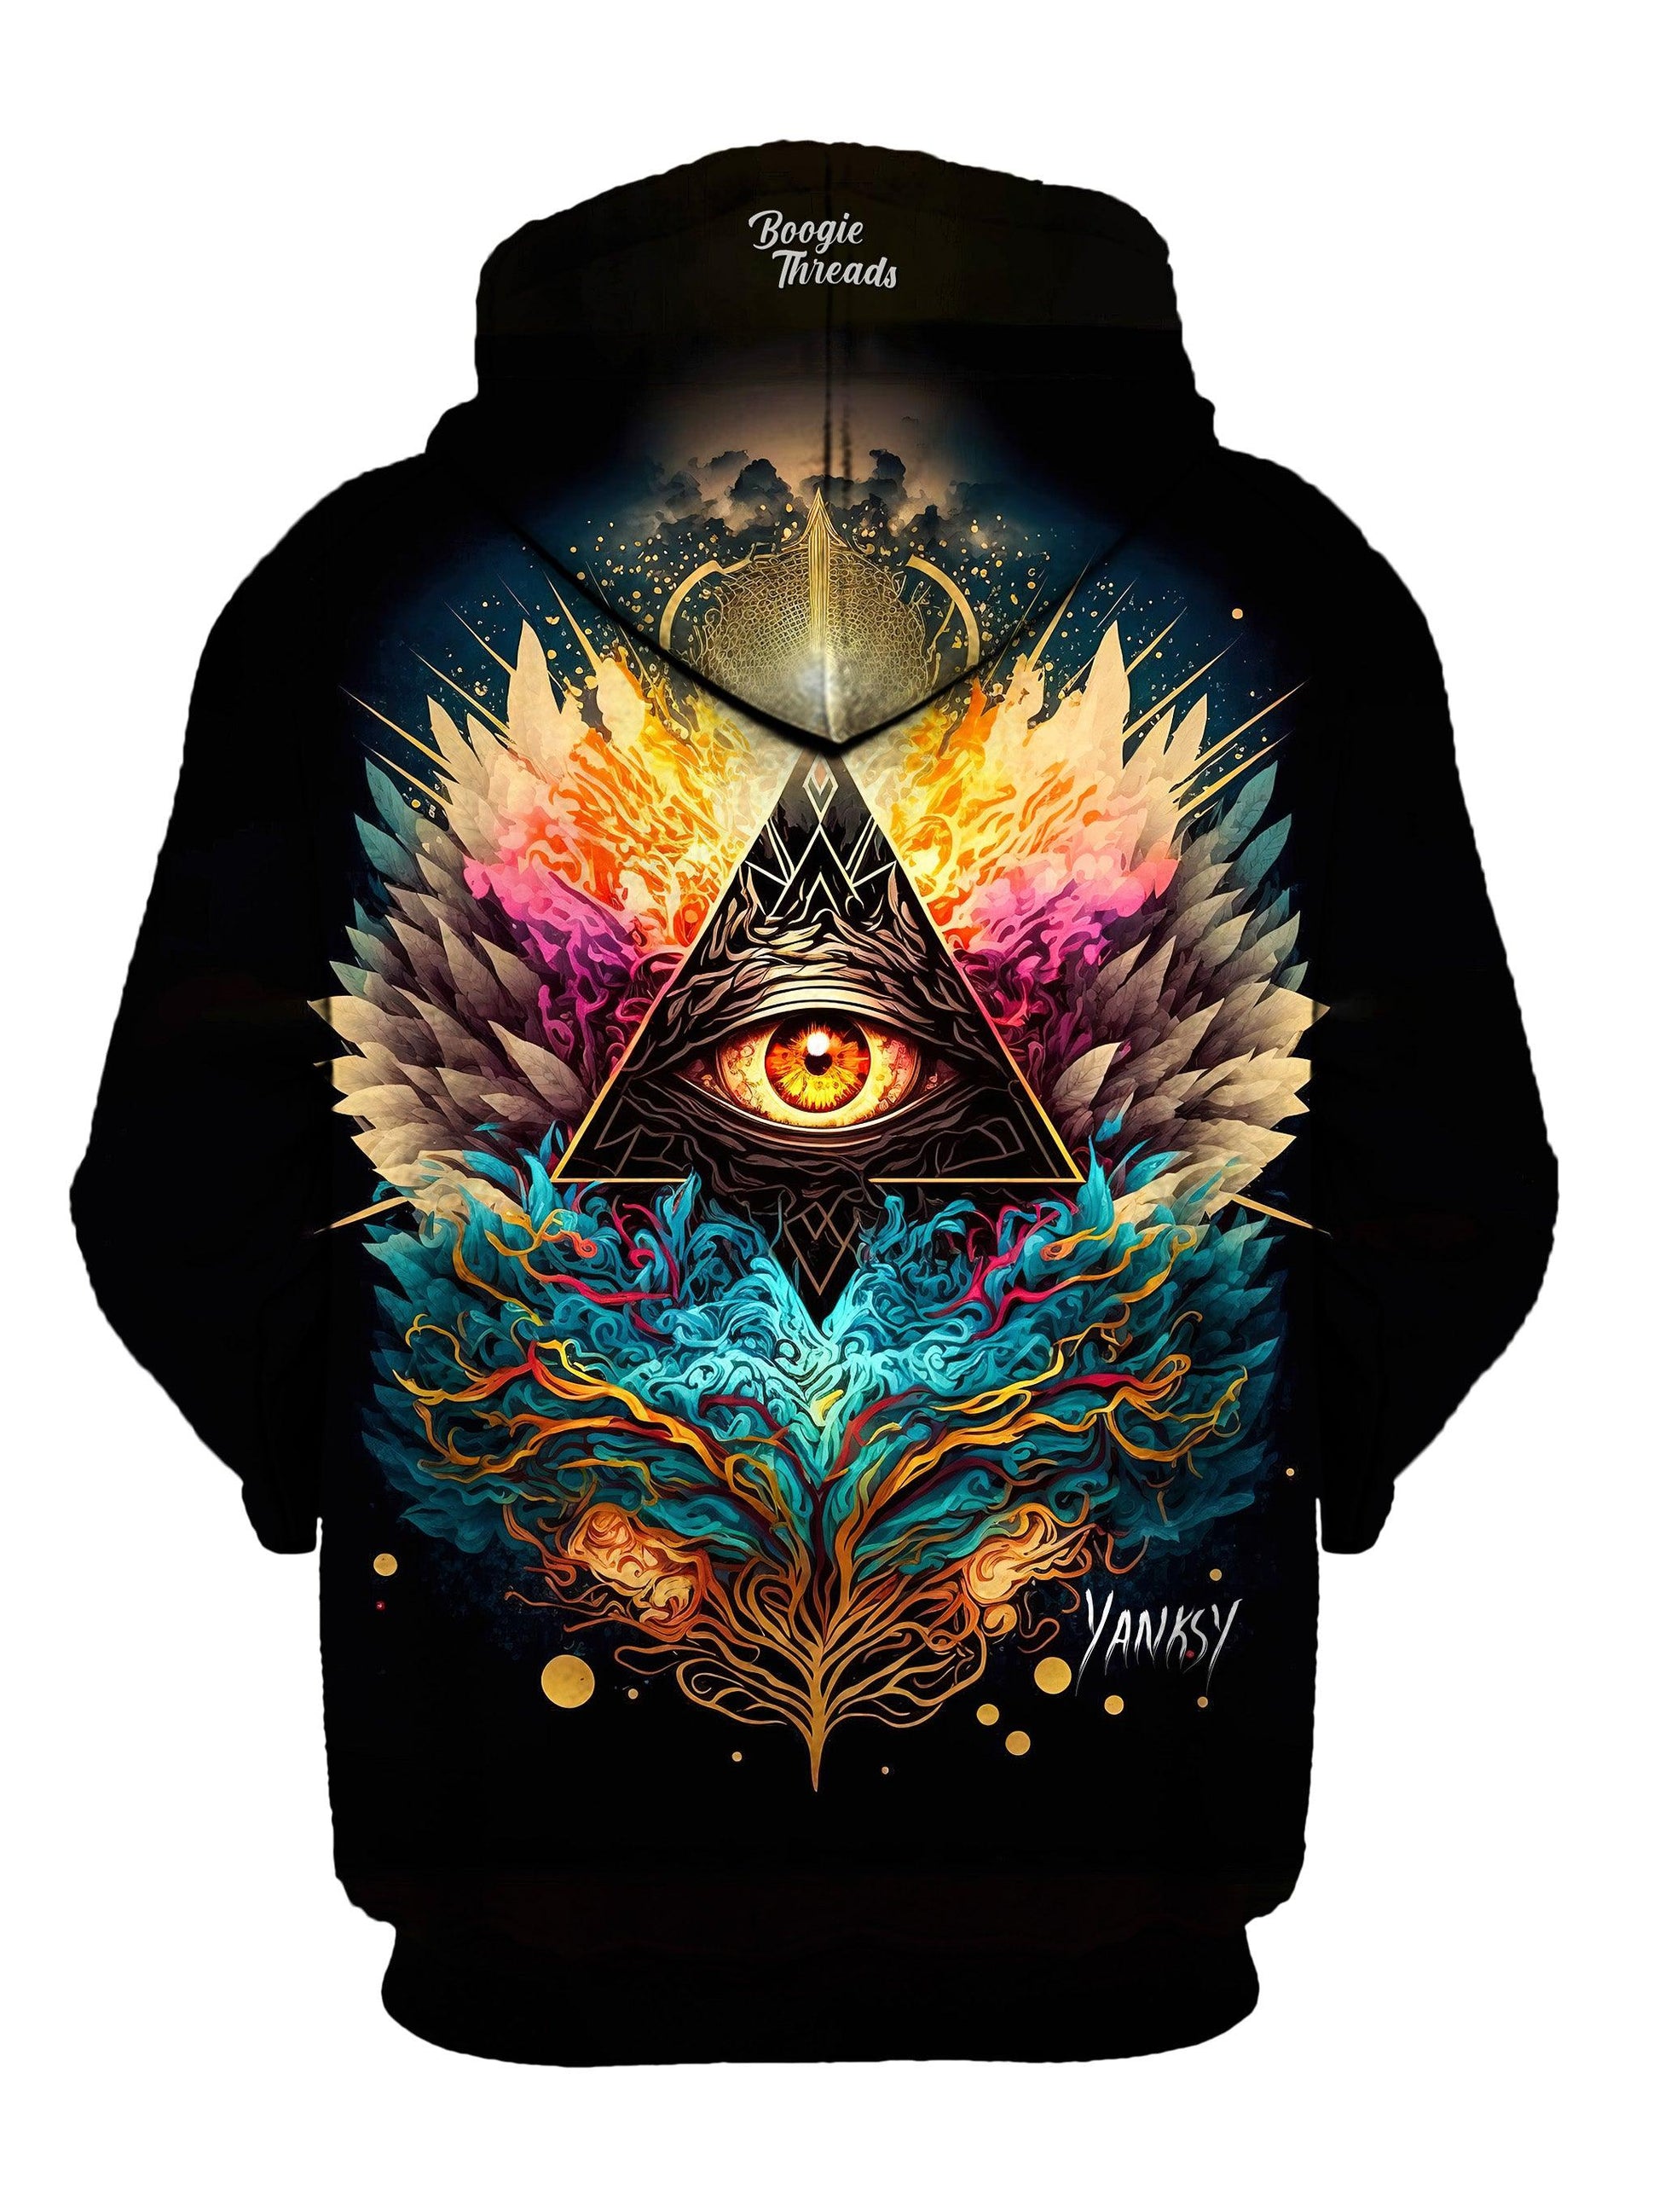 Get ready to dance the night away in this stylish and comfortable hoodie